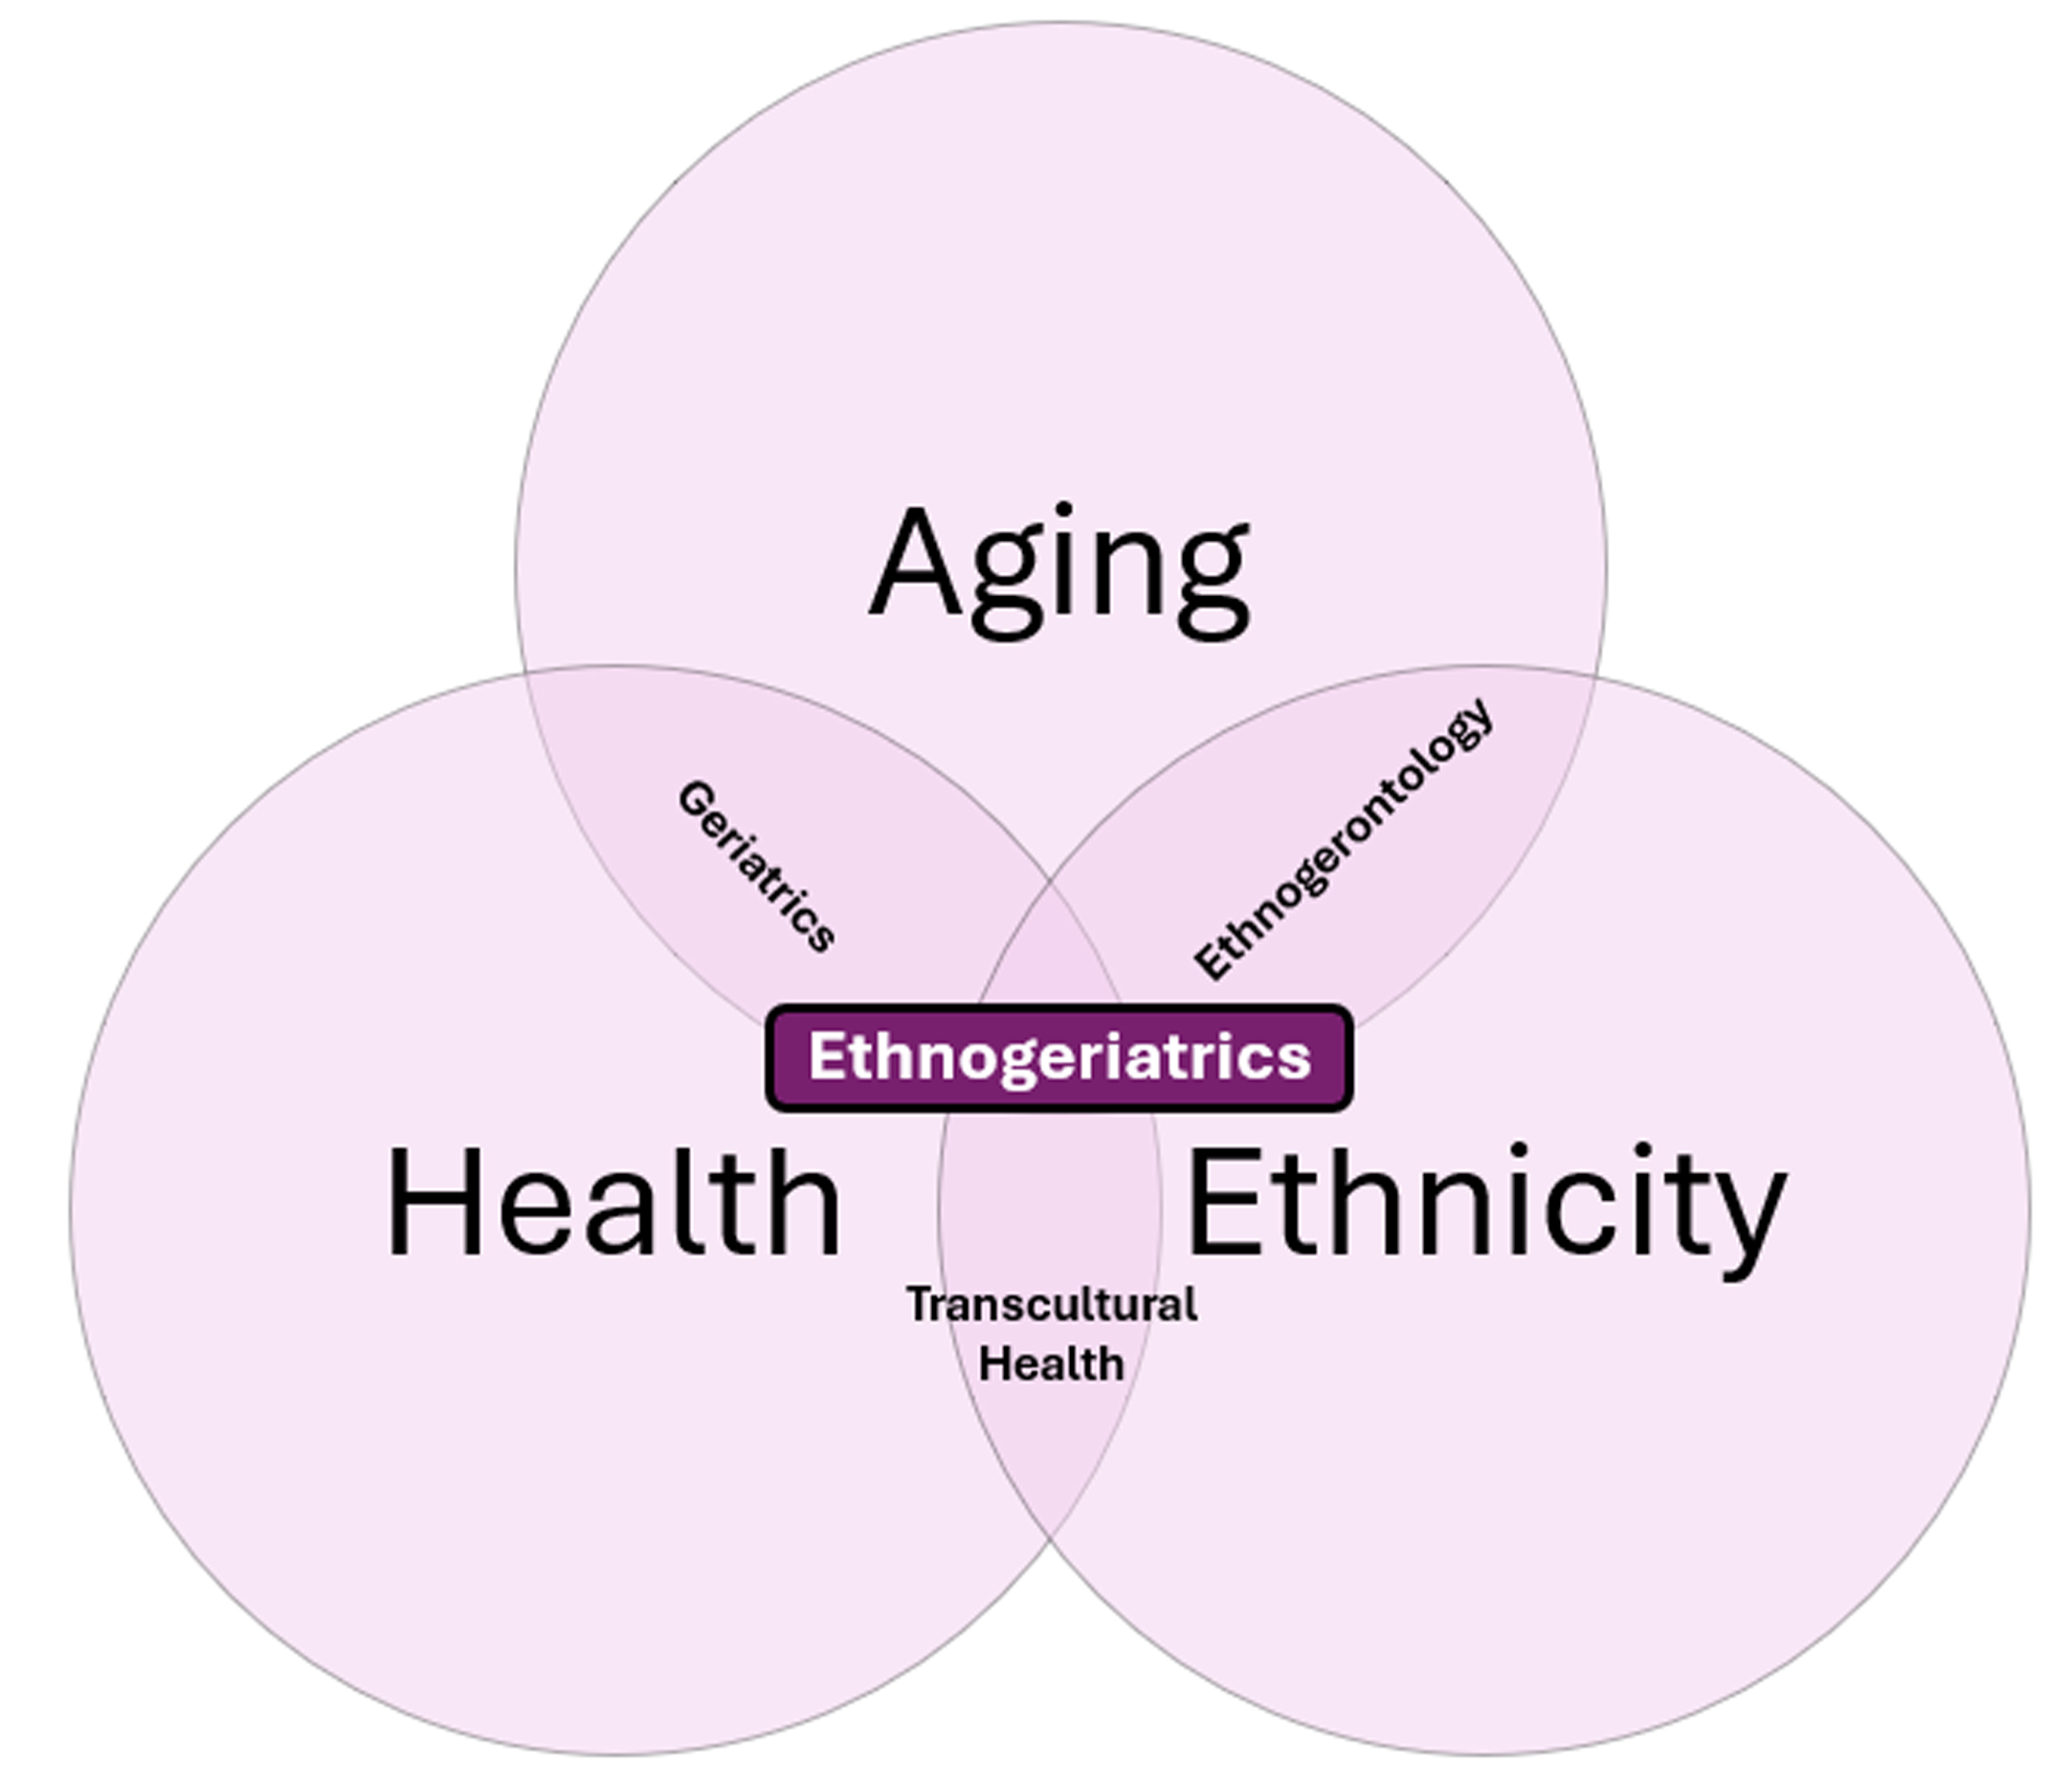 Ethnogeriatrics refers to the healthcare of elderly individuals, focusing on the convergence of aging, health, ethnicity, and culture.